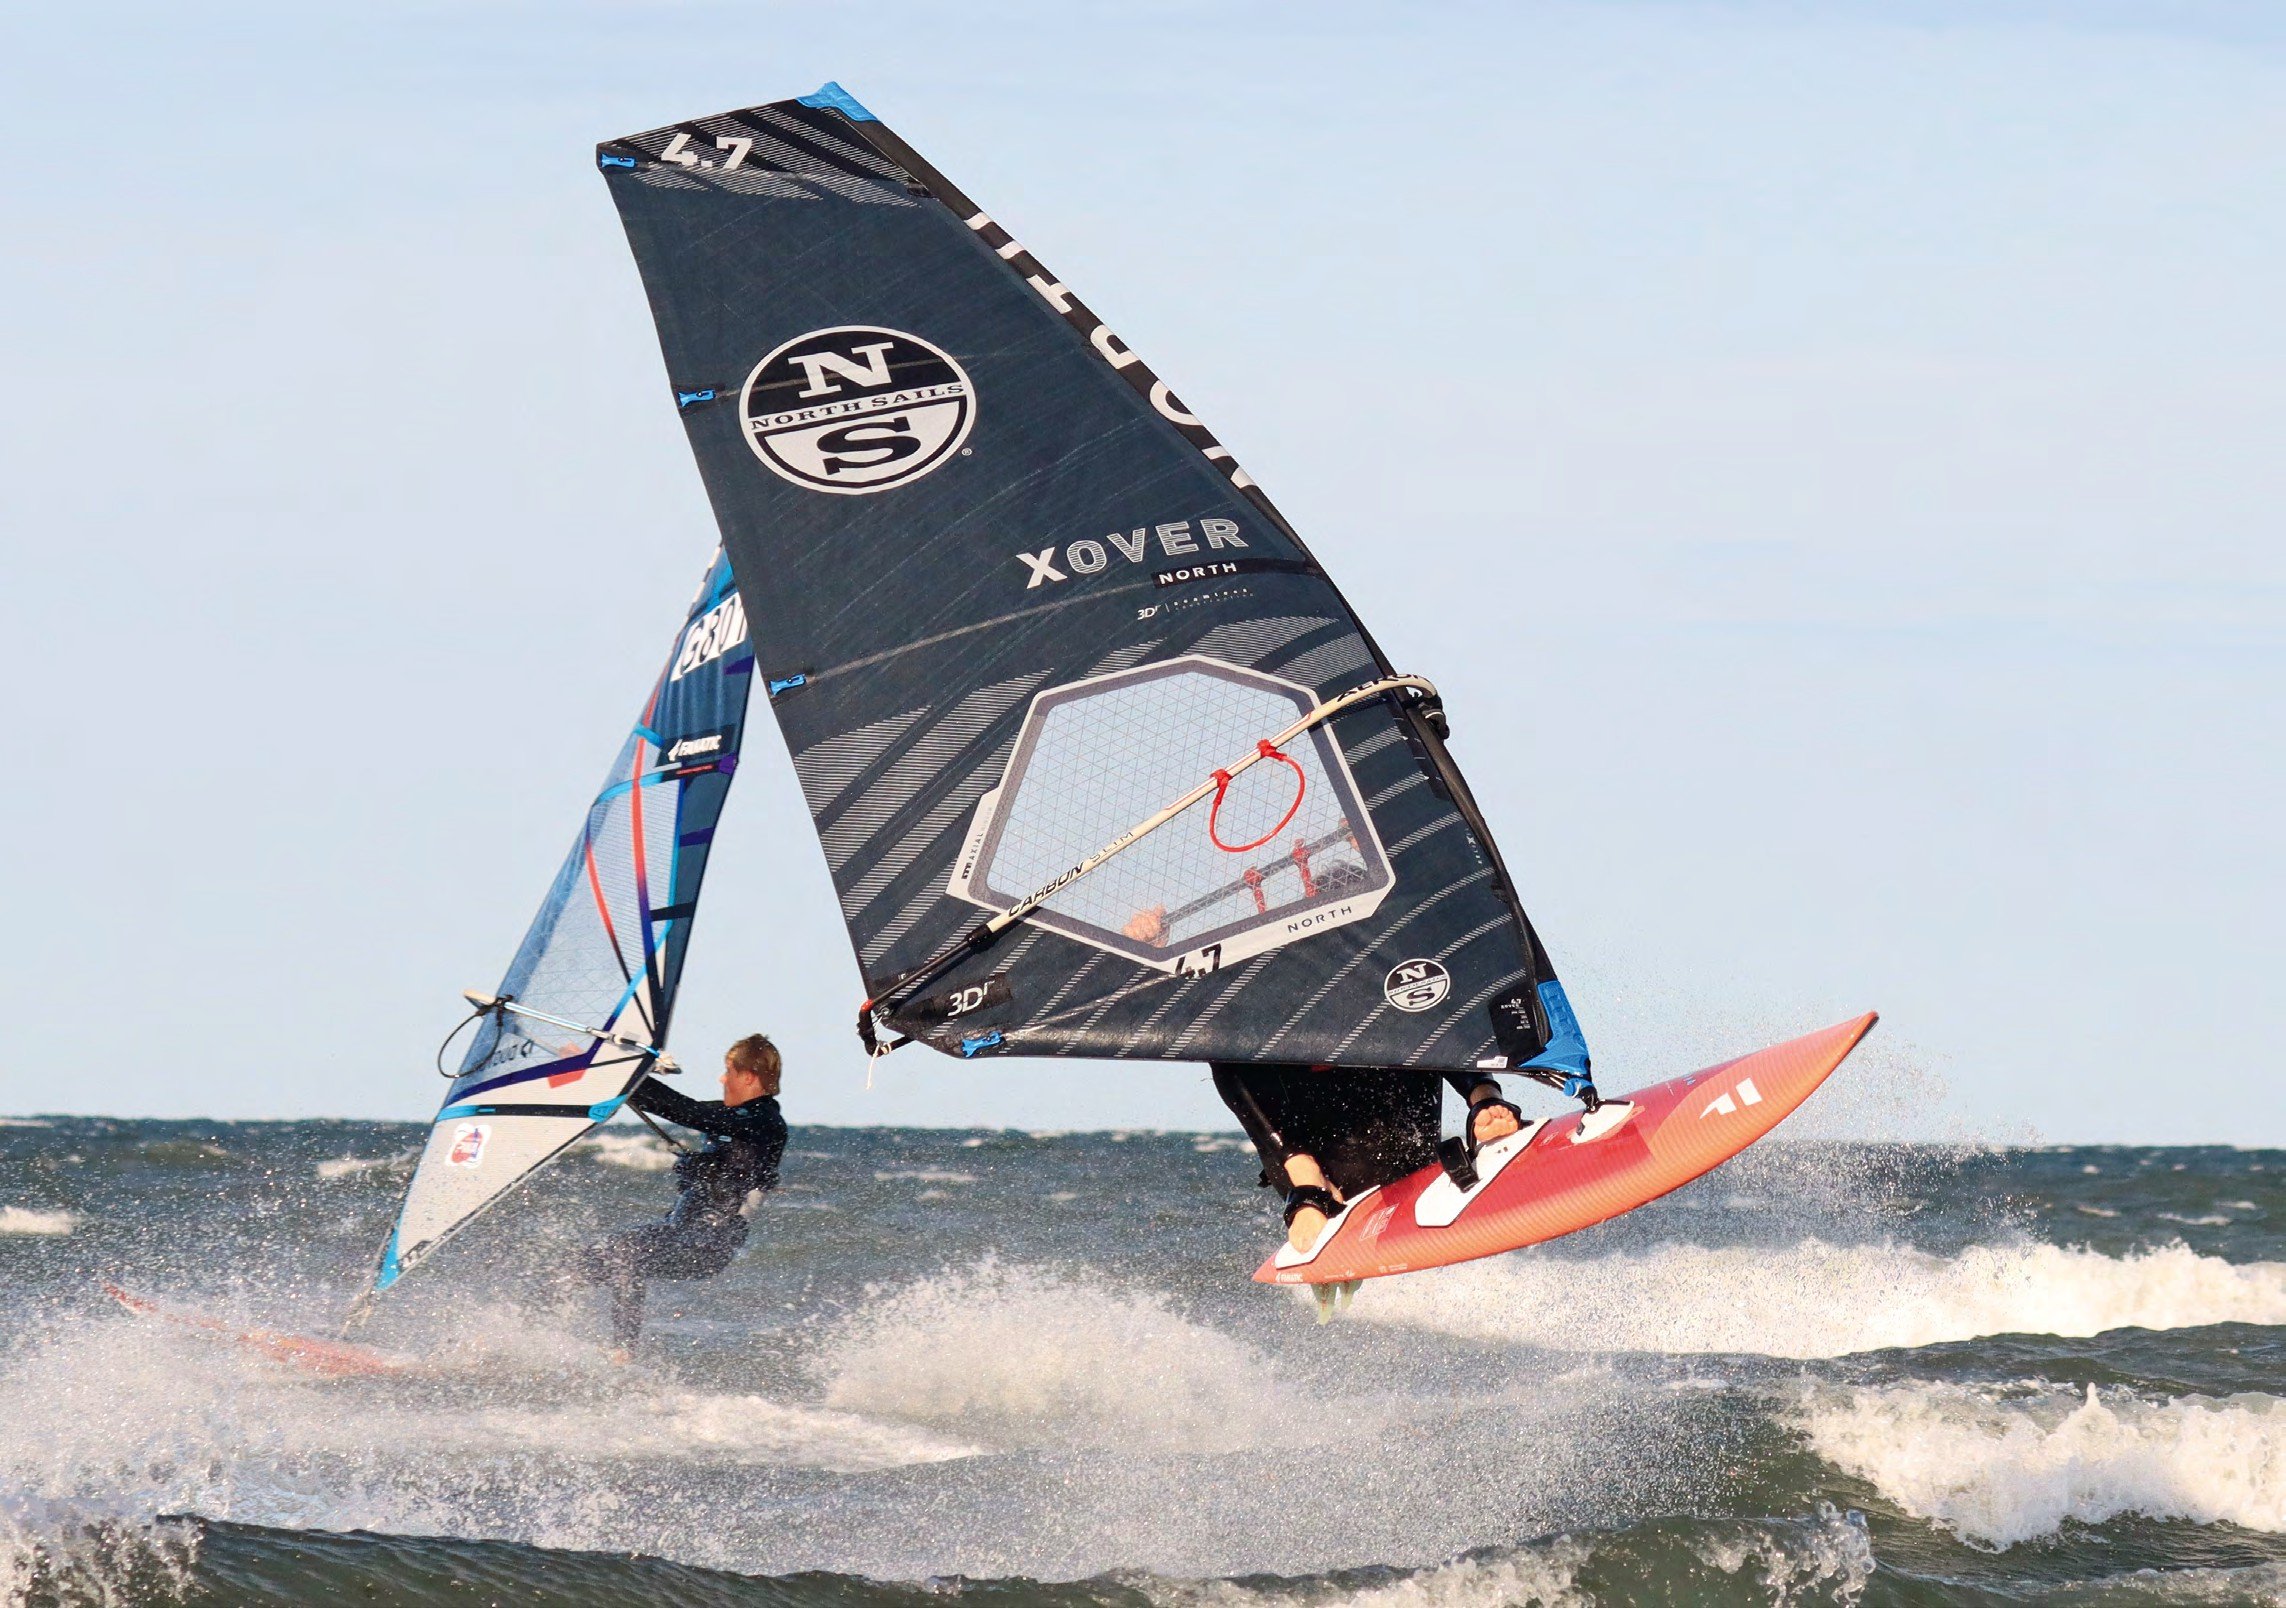 Test 2023: All-round sail North Sails X-Over in individual test